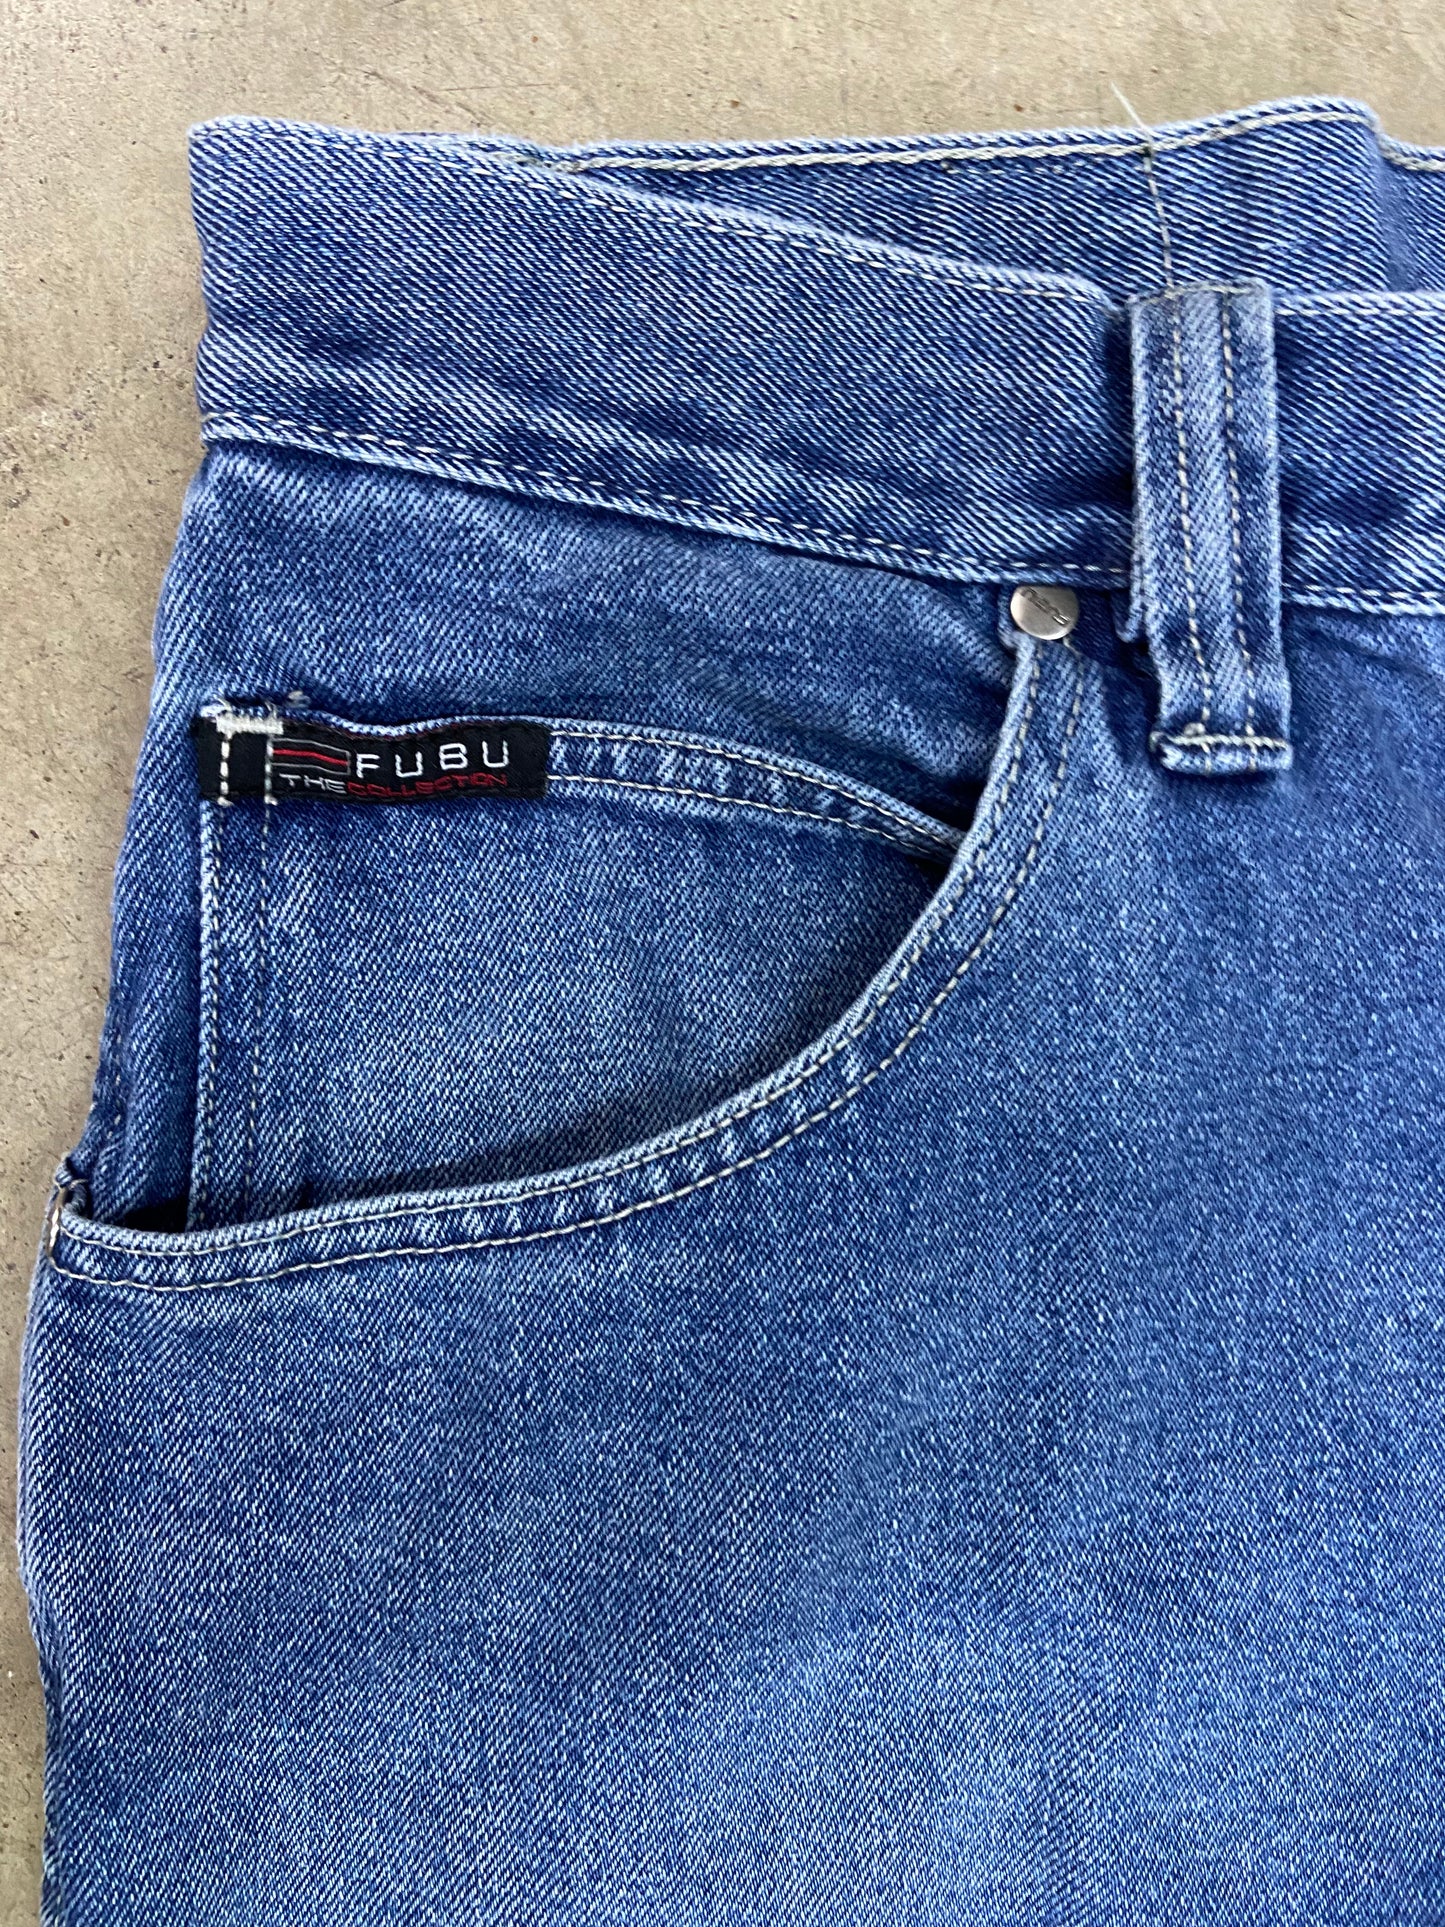 Load image into Gallery viewer, VTG Fubu Carpenter The Collection Jeans Sz 38x34
